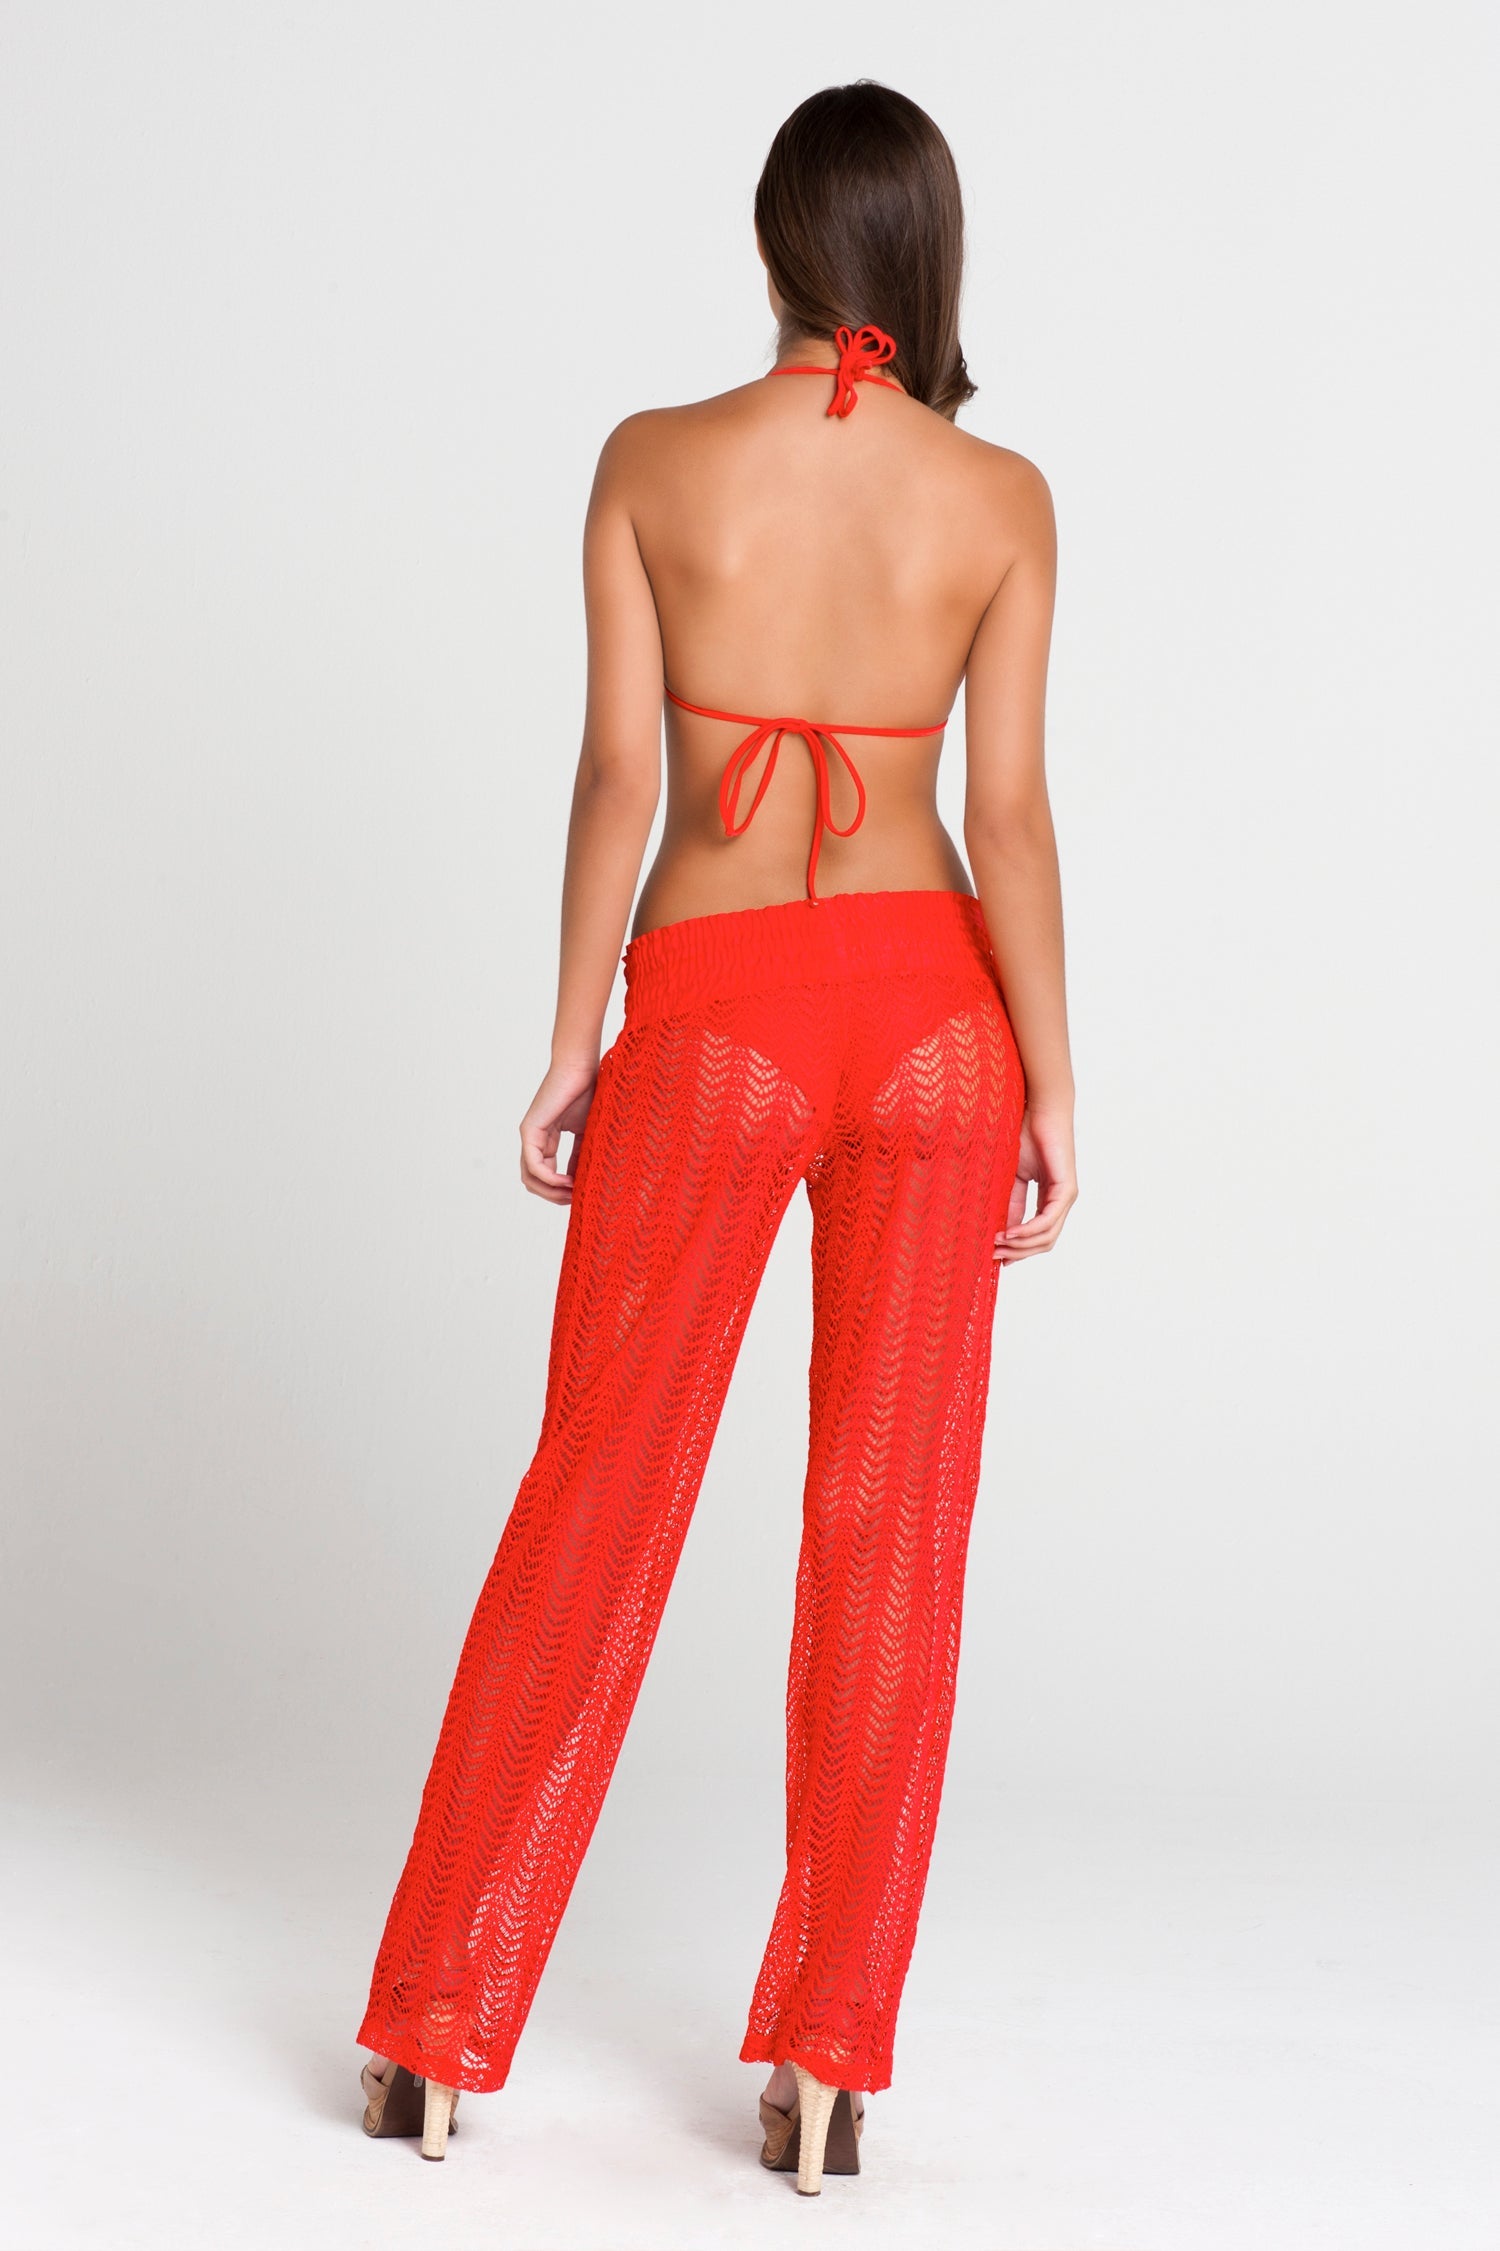 PASION Y ARENA - Molded Push Up Bandeau Halter Top & Poolside Pants • Luli Red